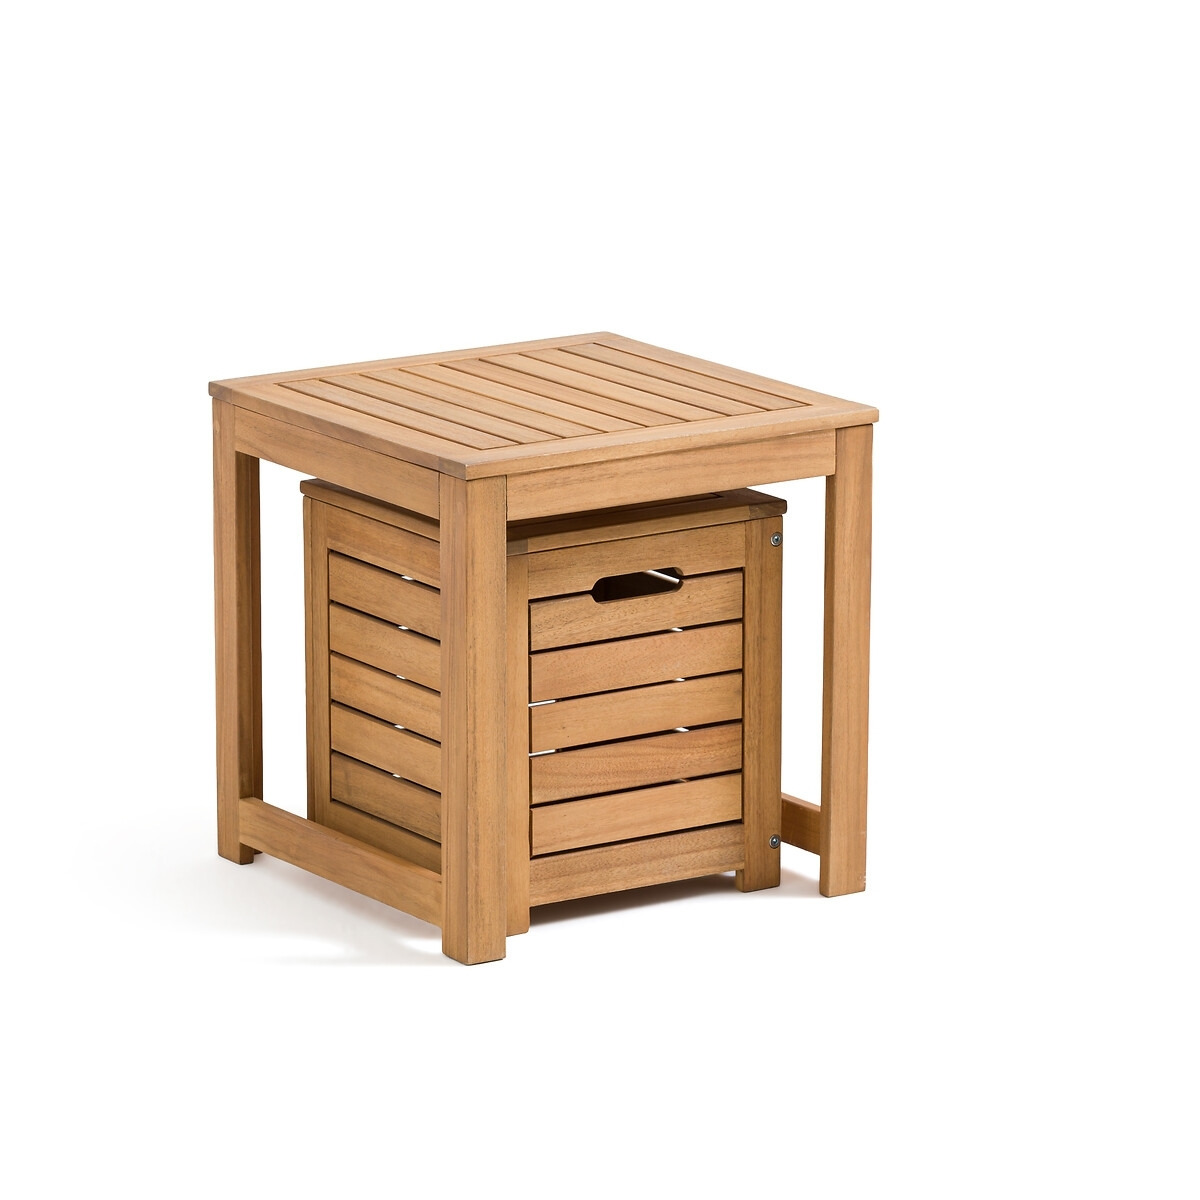 Garden Acacia Stool and Storage Chest - image 1